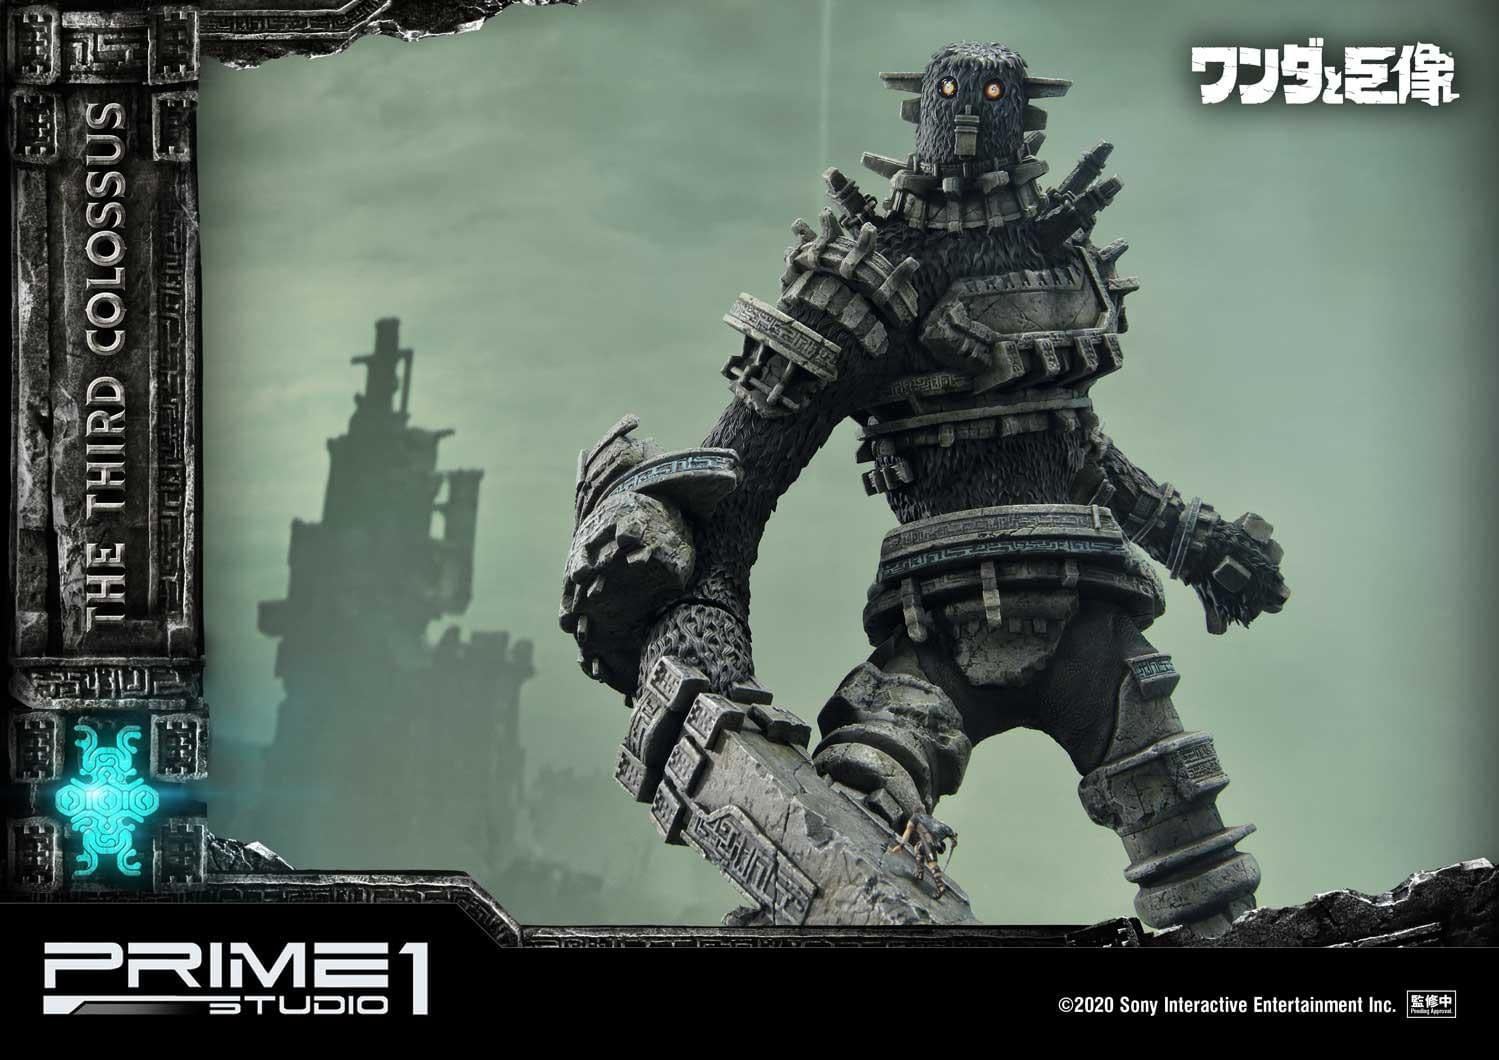 Watch one of the best boss fights from the Shadow of the Colossus